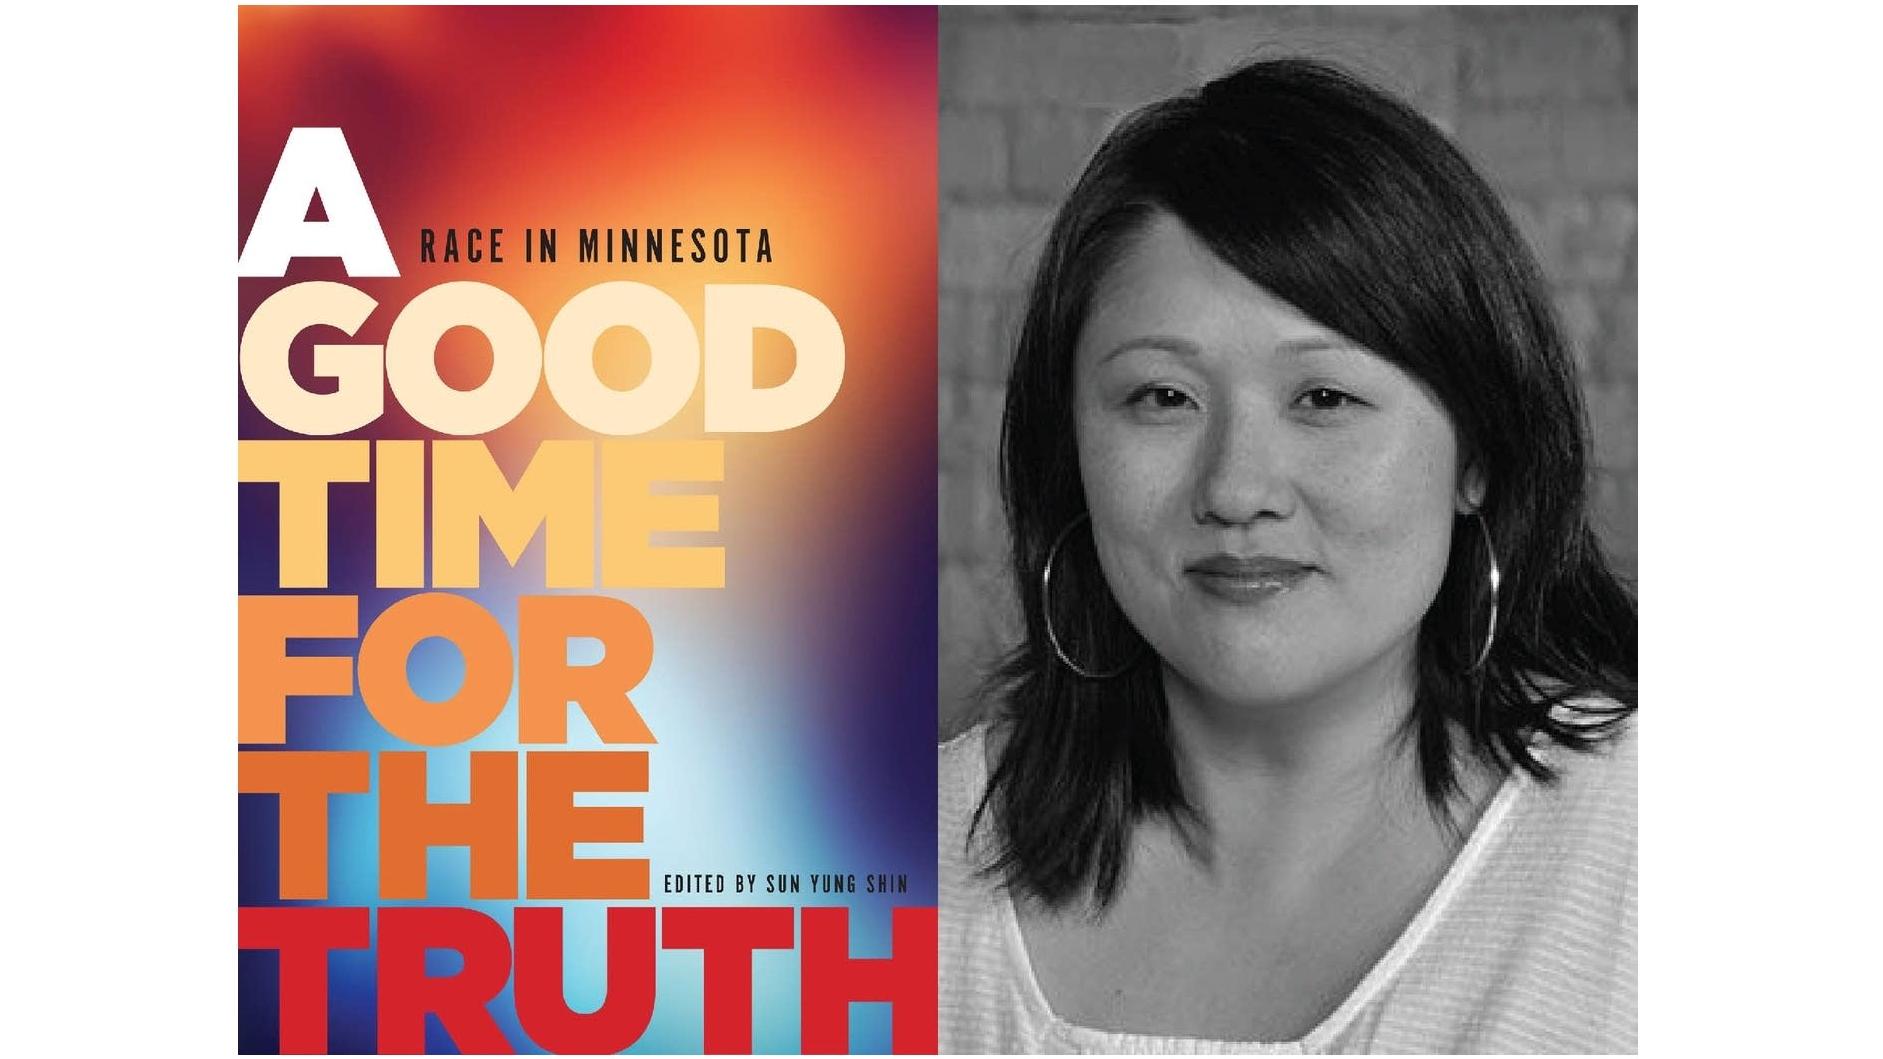 The cover of "A Good Time for the Truth" adjacent to a photo of its editor, Sun Yung Shin.